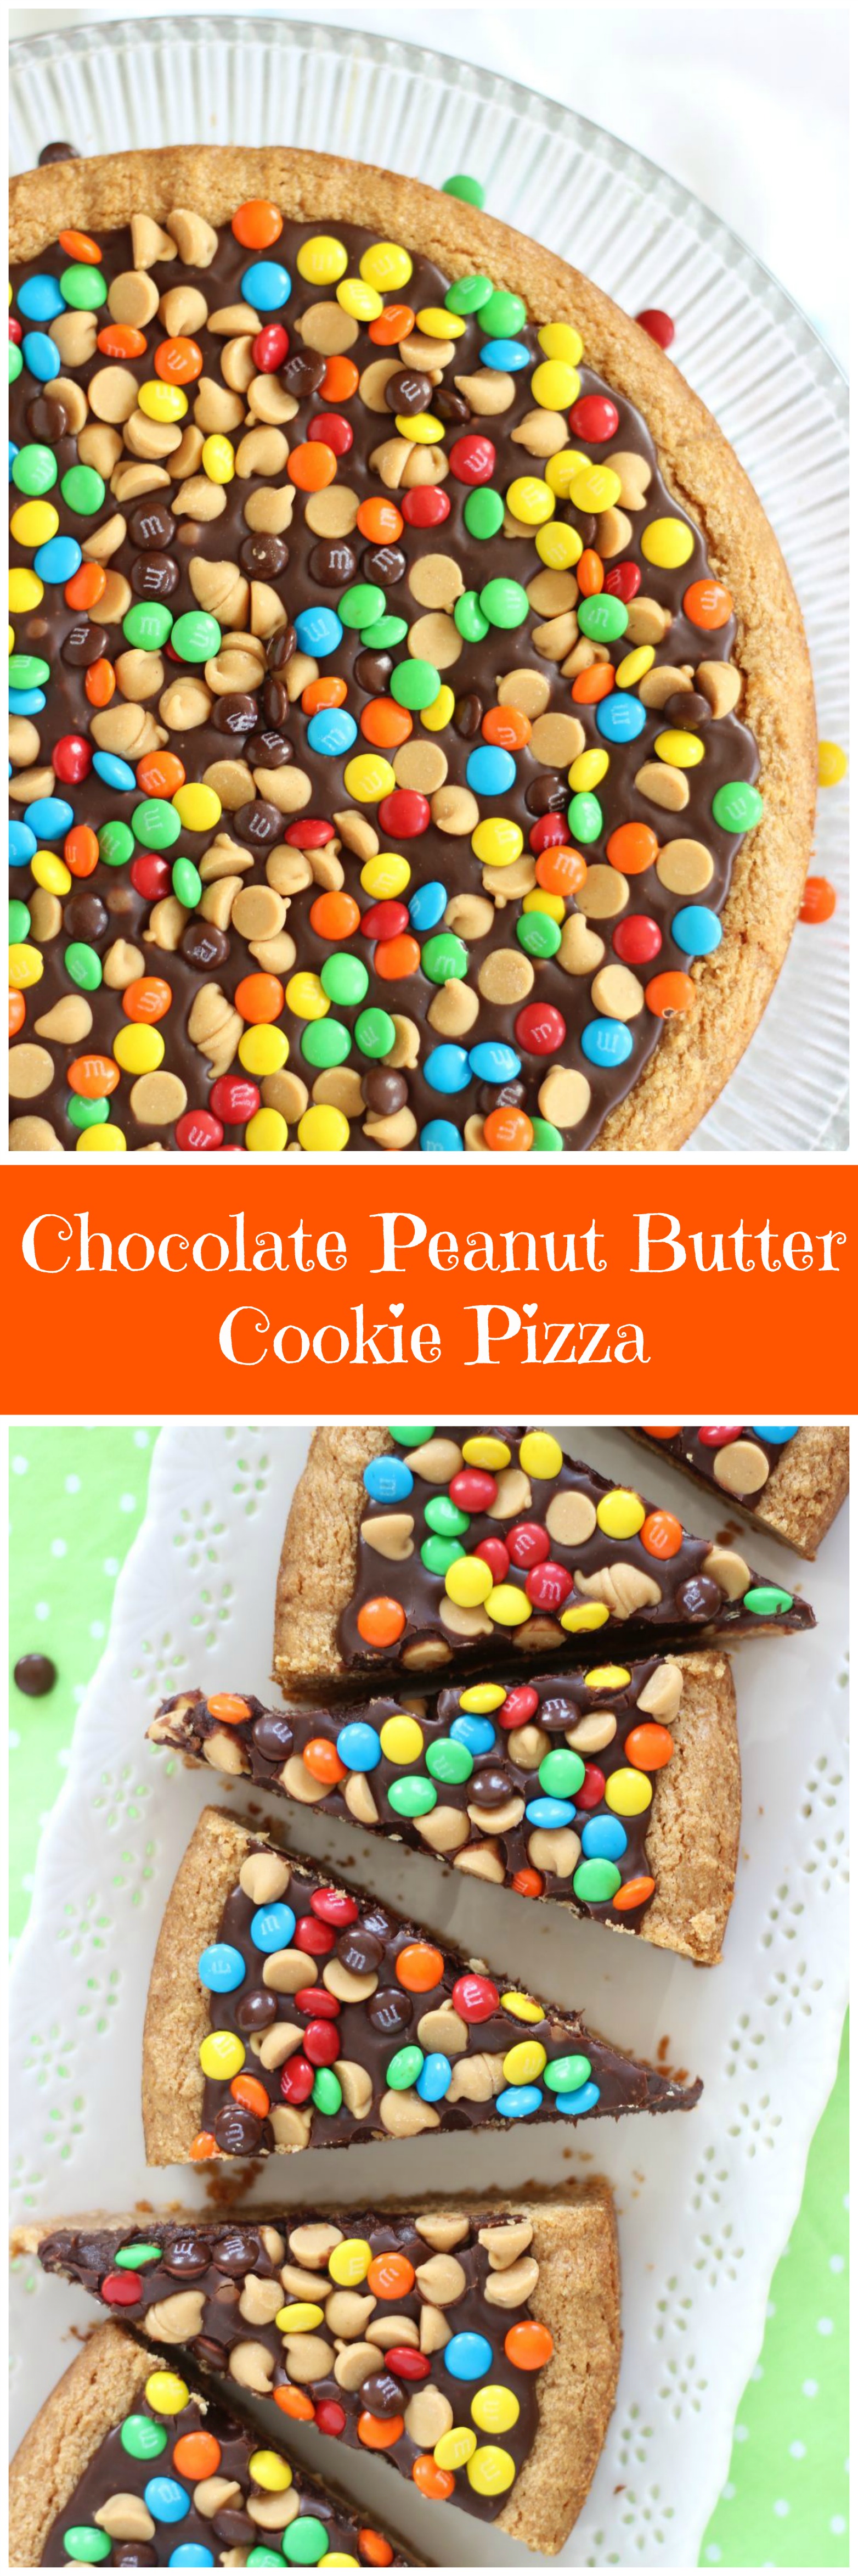 Chocolate Peanut Butter Cookie Pizza